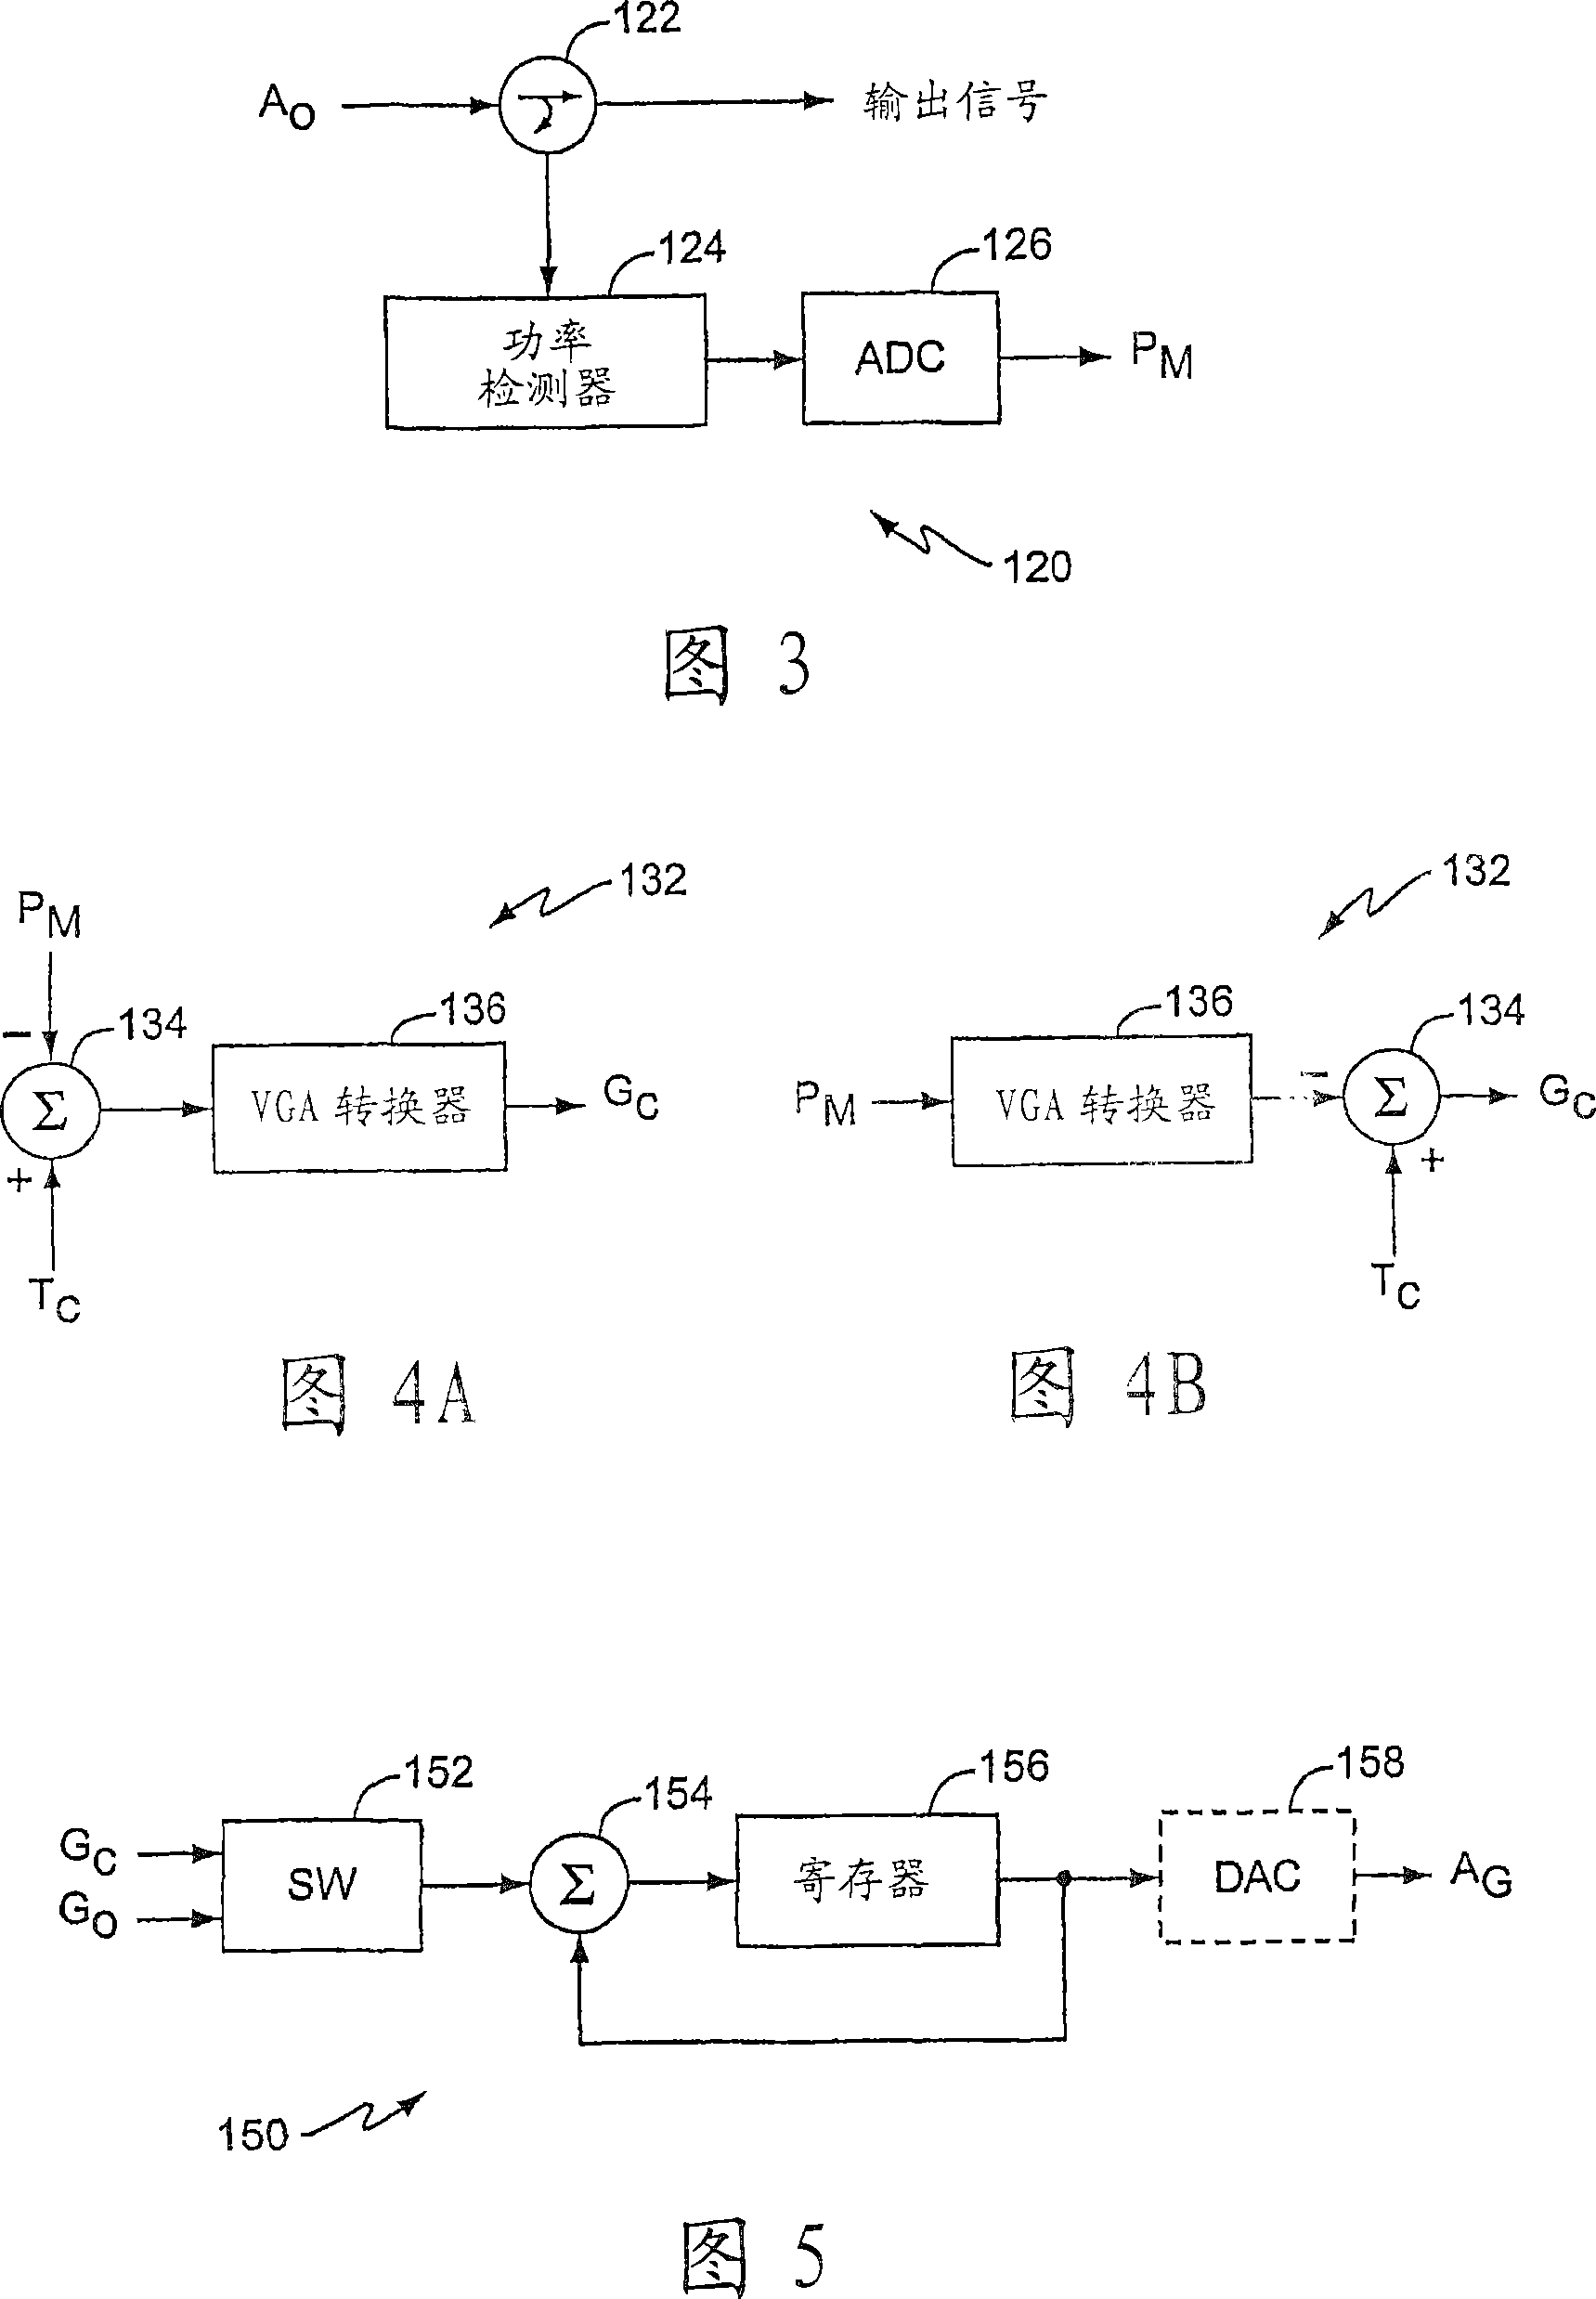 Continuously alternating closed and open loop power control